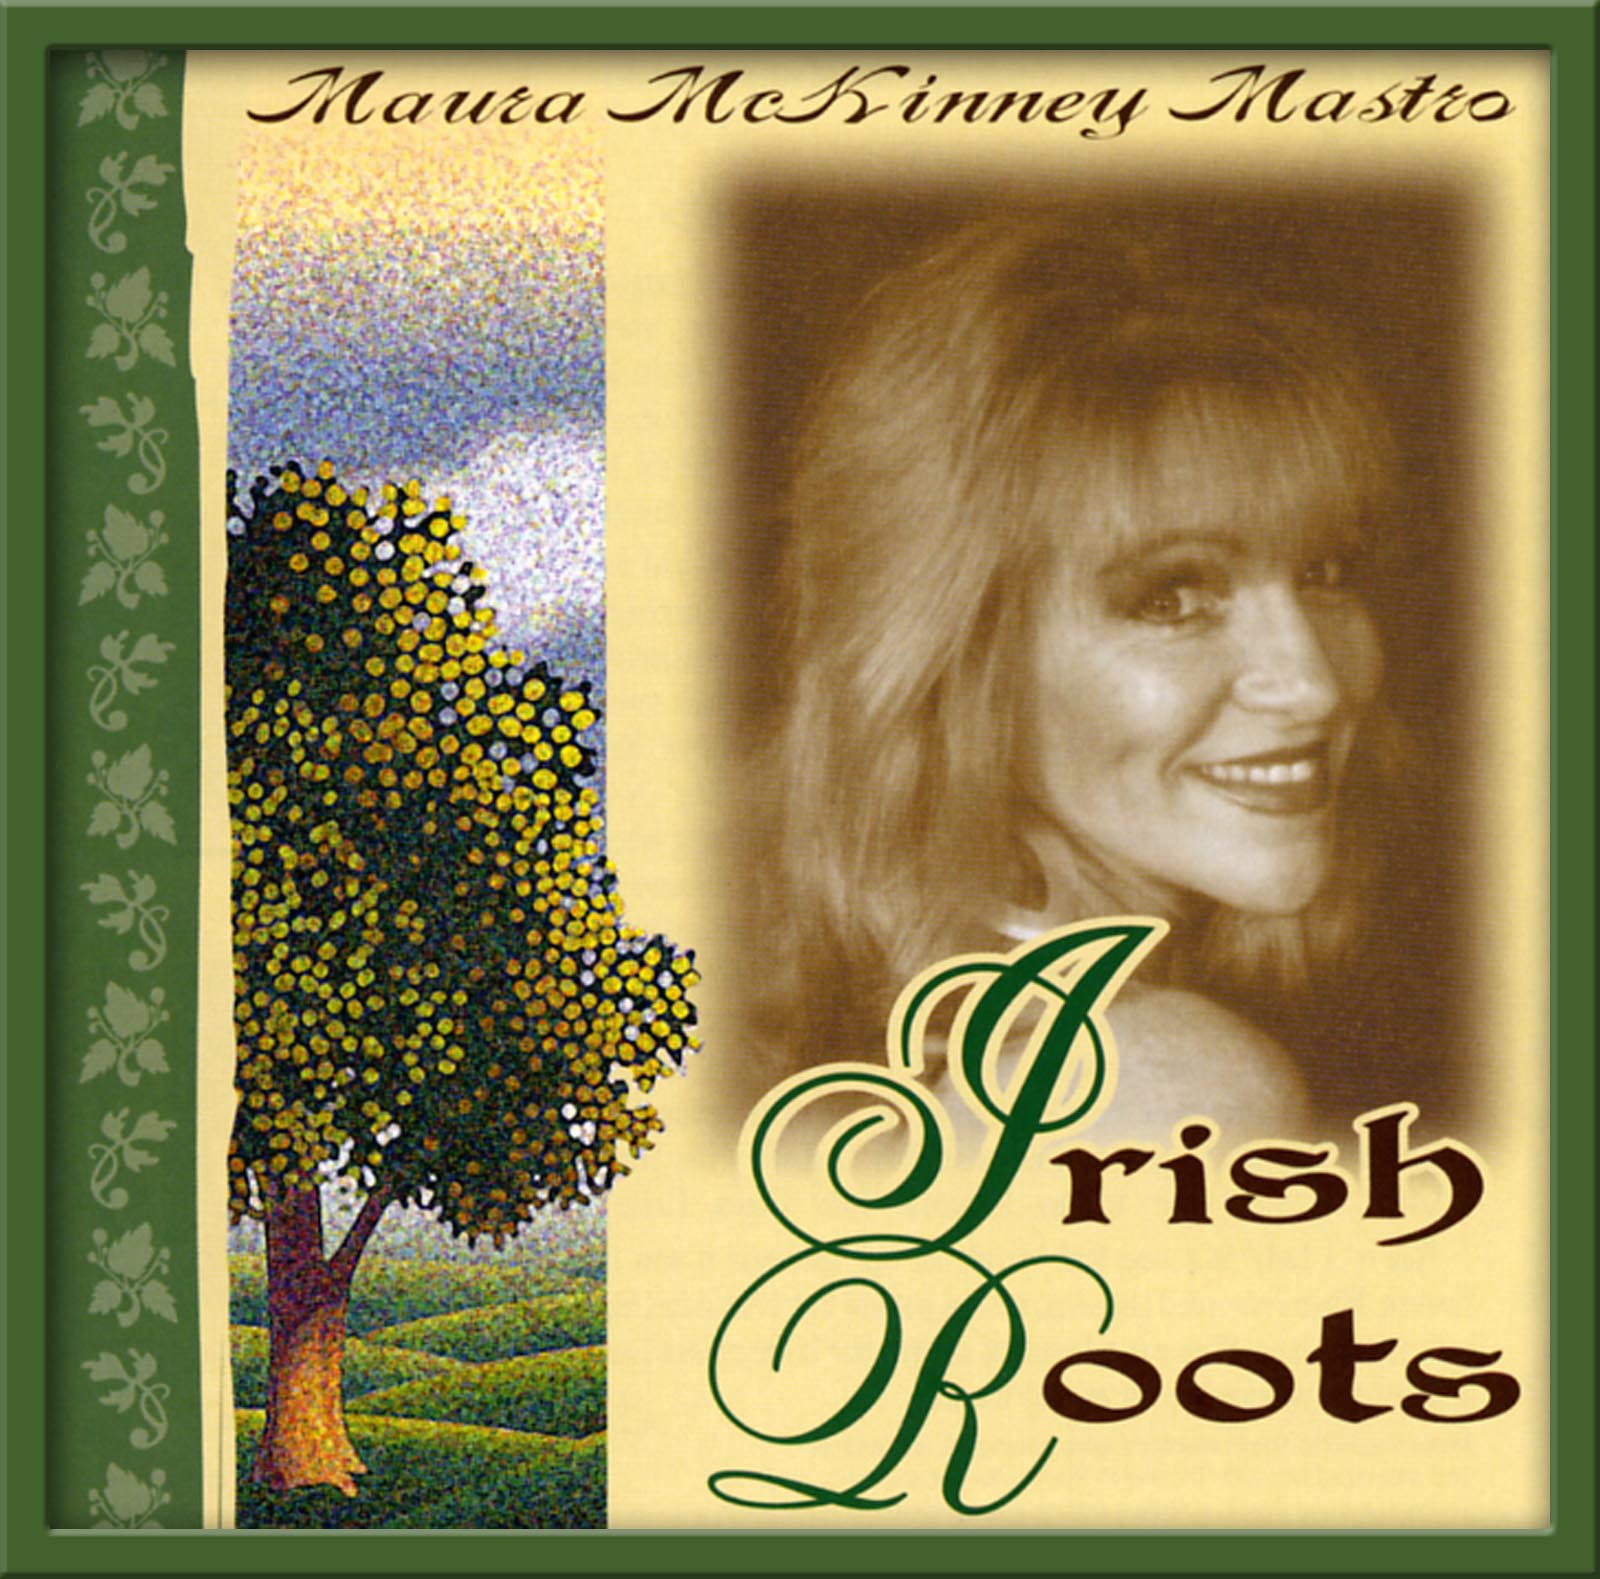 A heart stirring collection of Irish ballads and a few highly personal compositions sung with clarity and passion by an artist whose voice will touch you on a deeply emotional level.